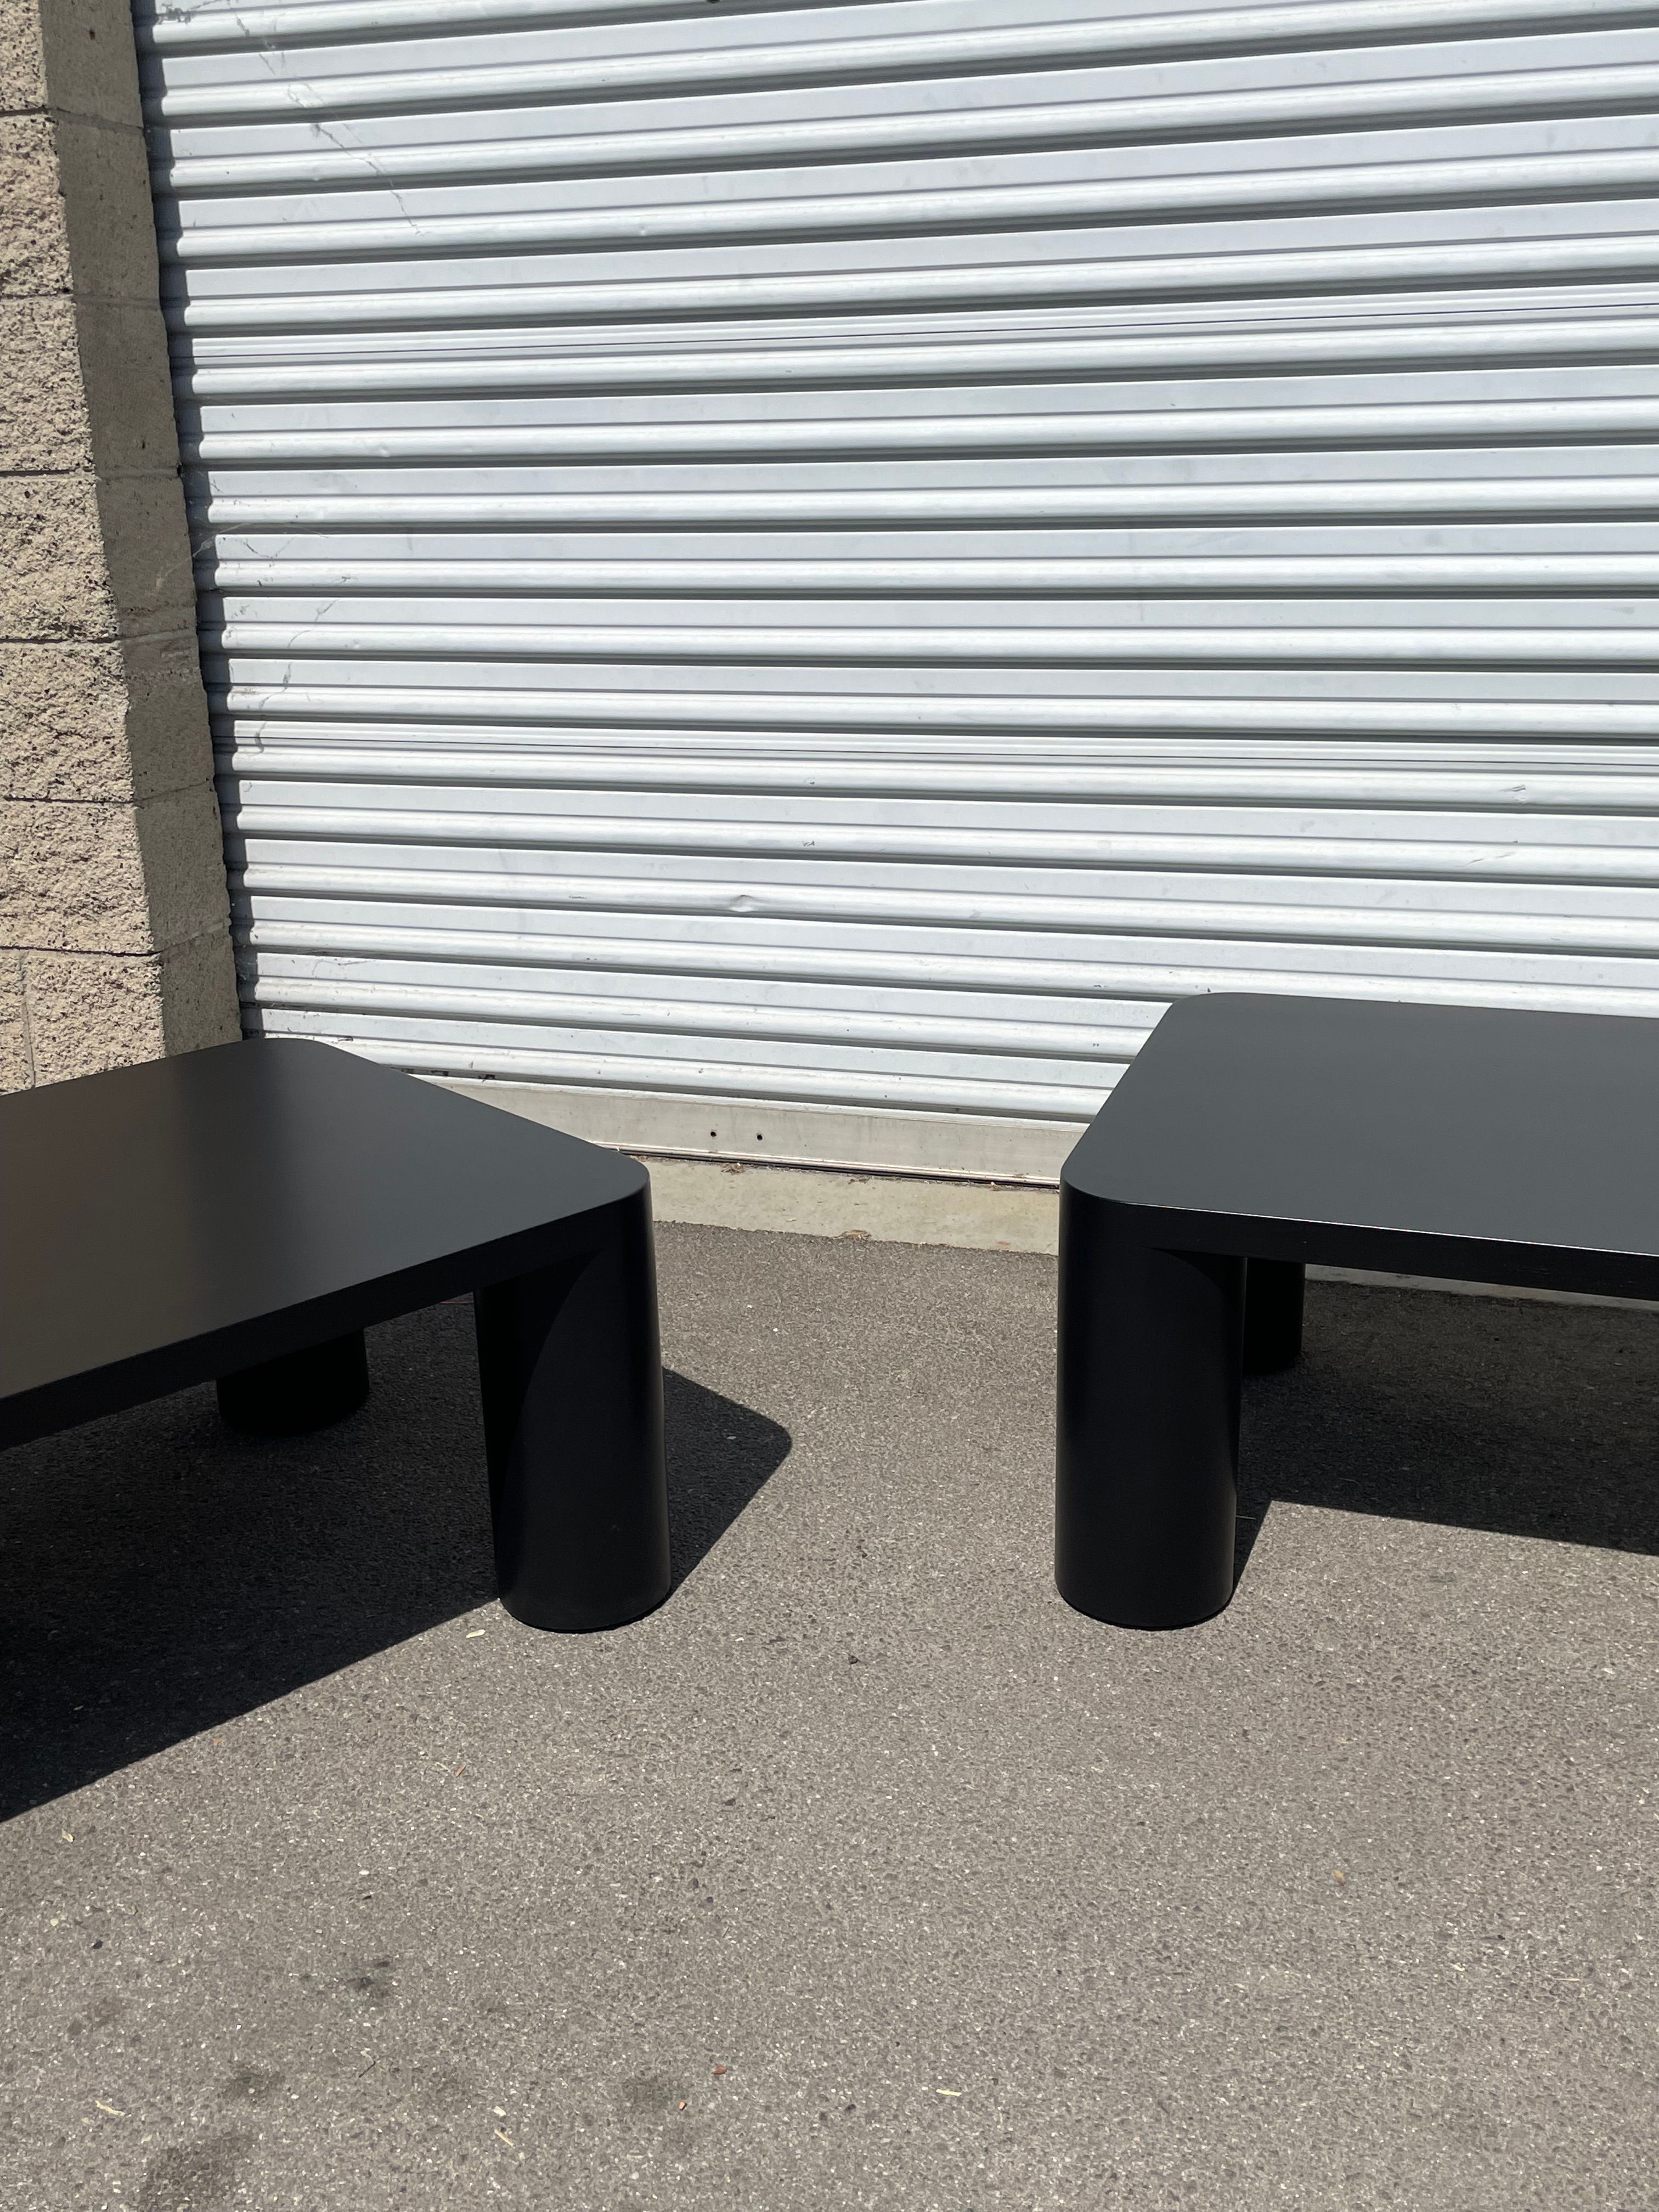  Four Cylinder Coffee Tables - black product image 5